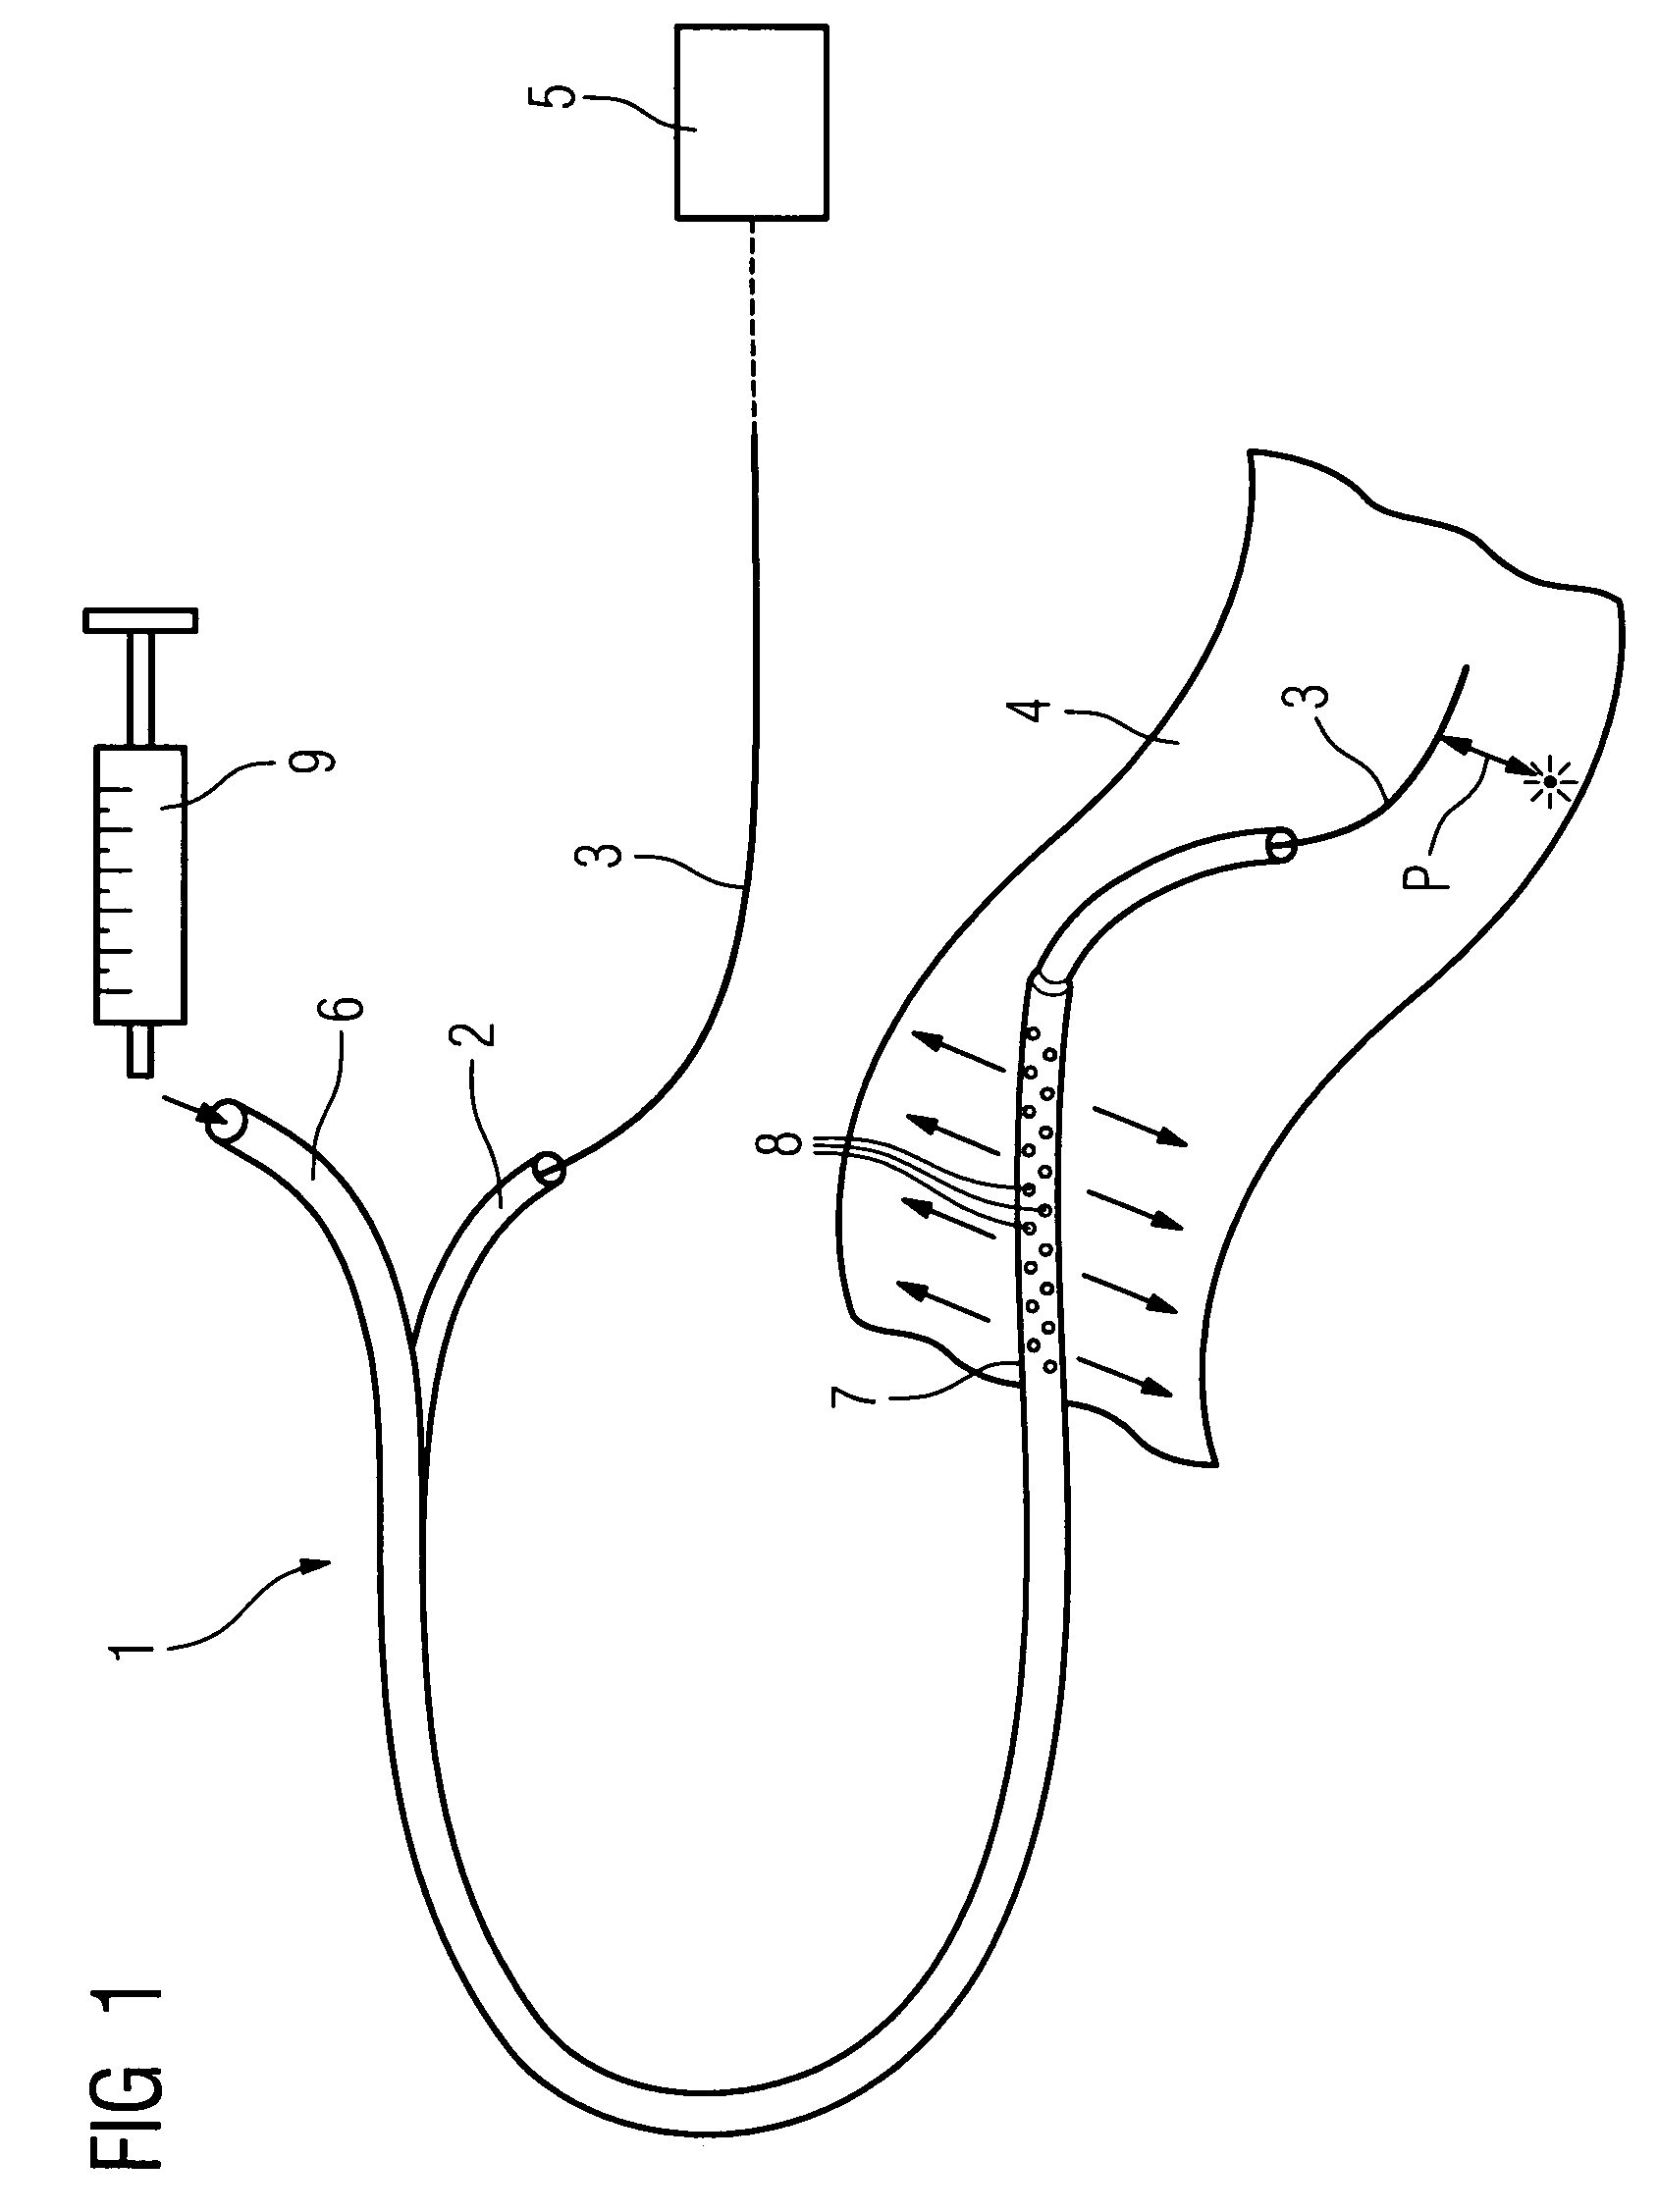 Method of recording two-dimensional images of a perfused blood vessel